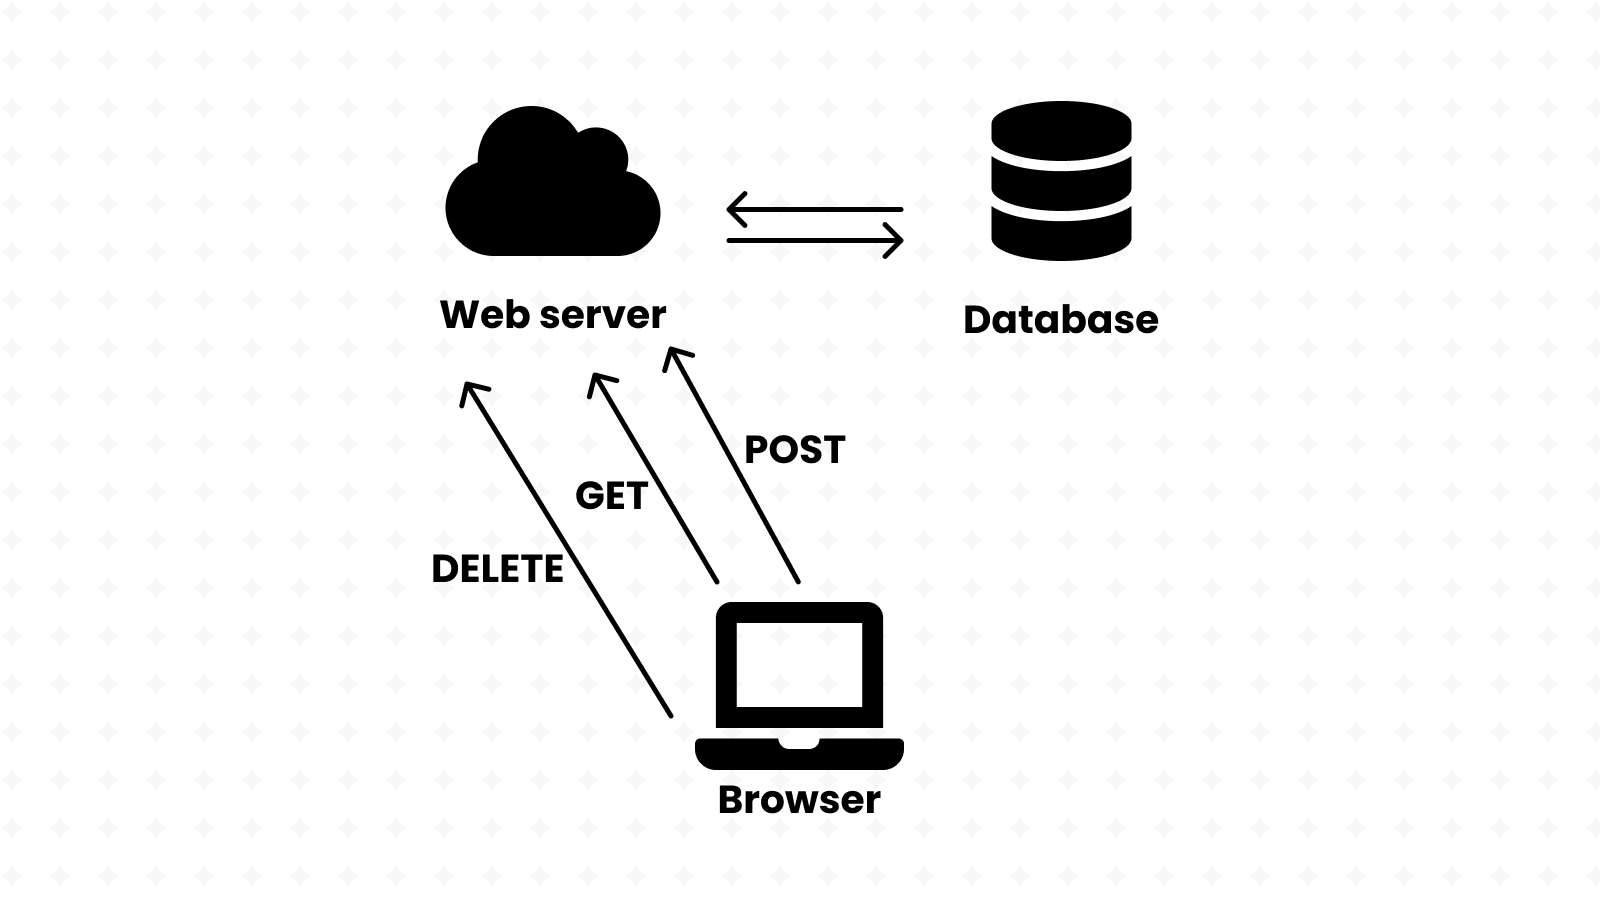 A RESTful API communicating with the browser through a variety of HTTP actions, and relaying those to a database.